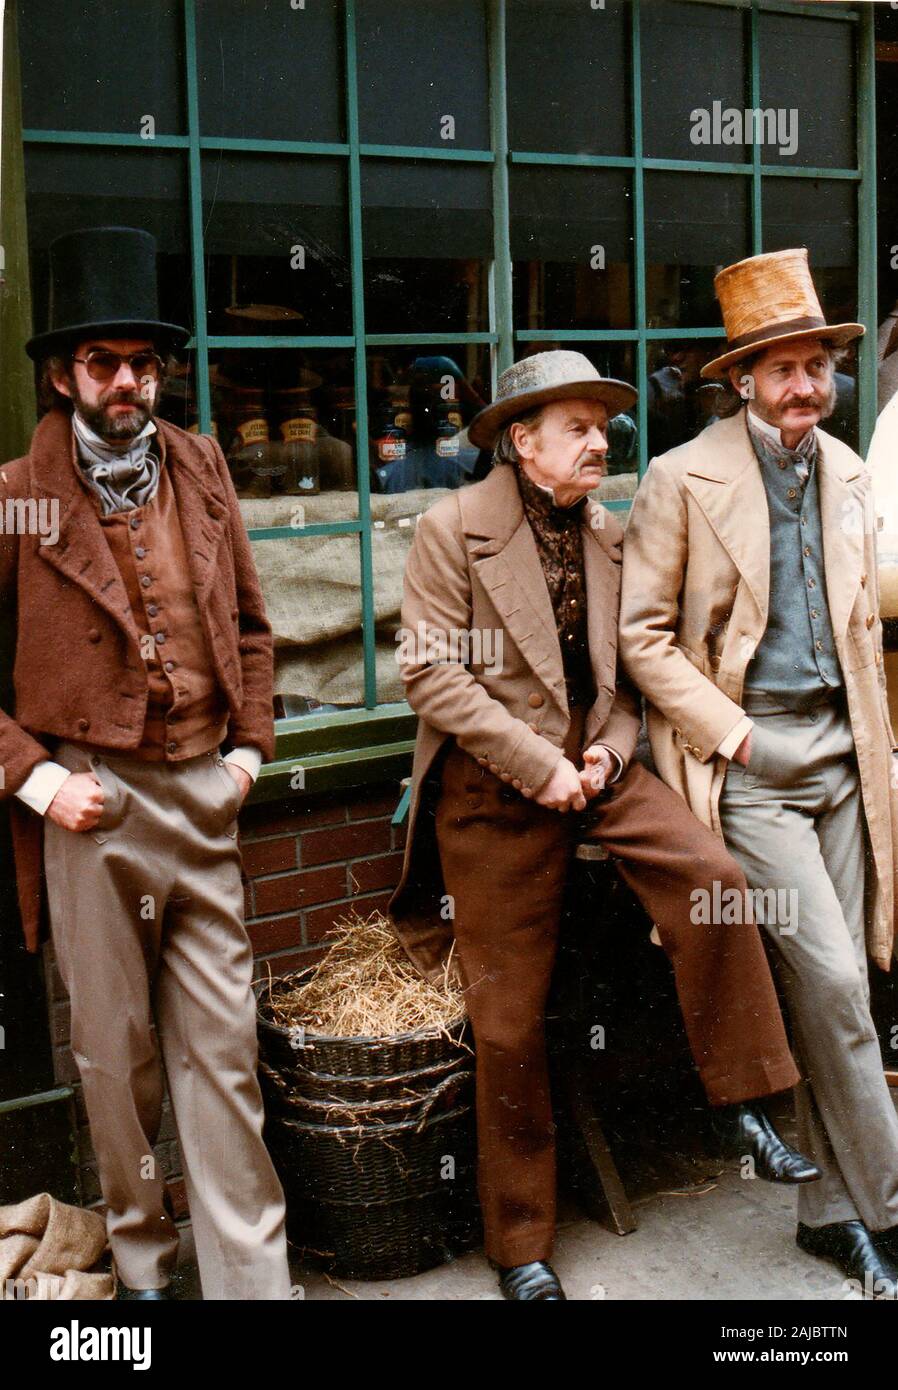 1986 - Behind the scenes image taken at the filming of the BBC series David Copperfield -  In Whitby North Yorkshire - June 1986  (A rest between takes) Stock Photo